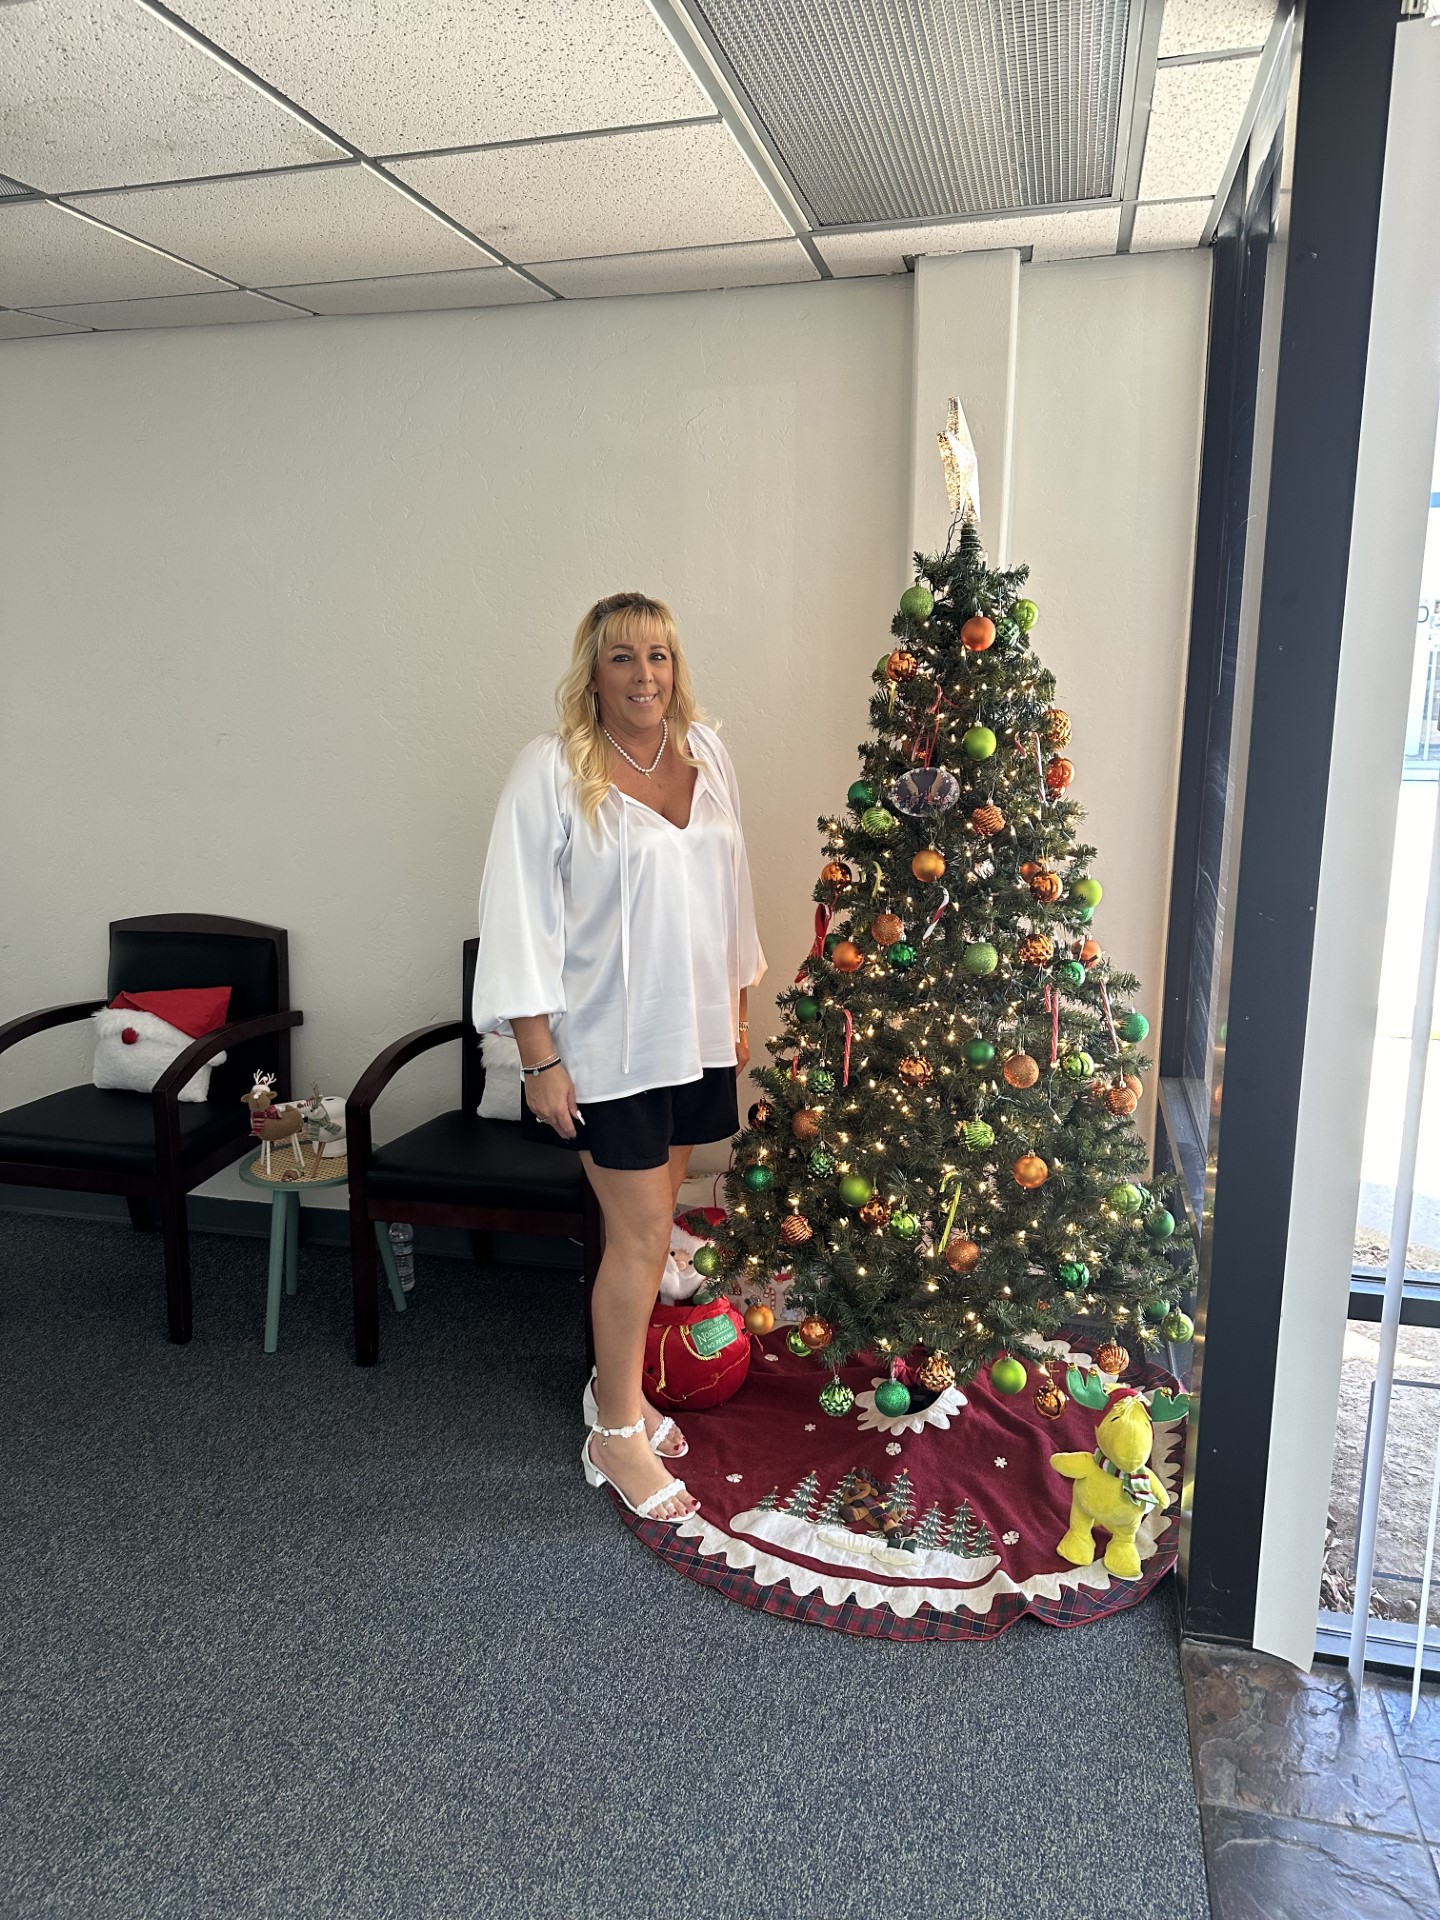 Our Amazing Amanda getting our SERVPRO tree ready for the holidays here!